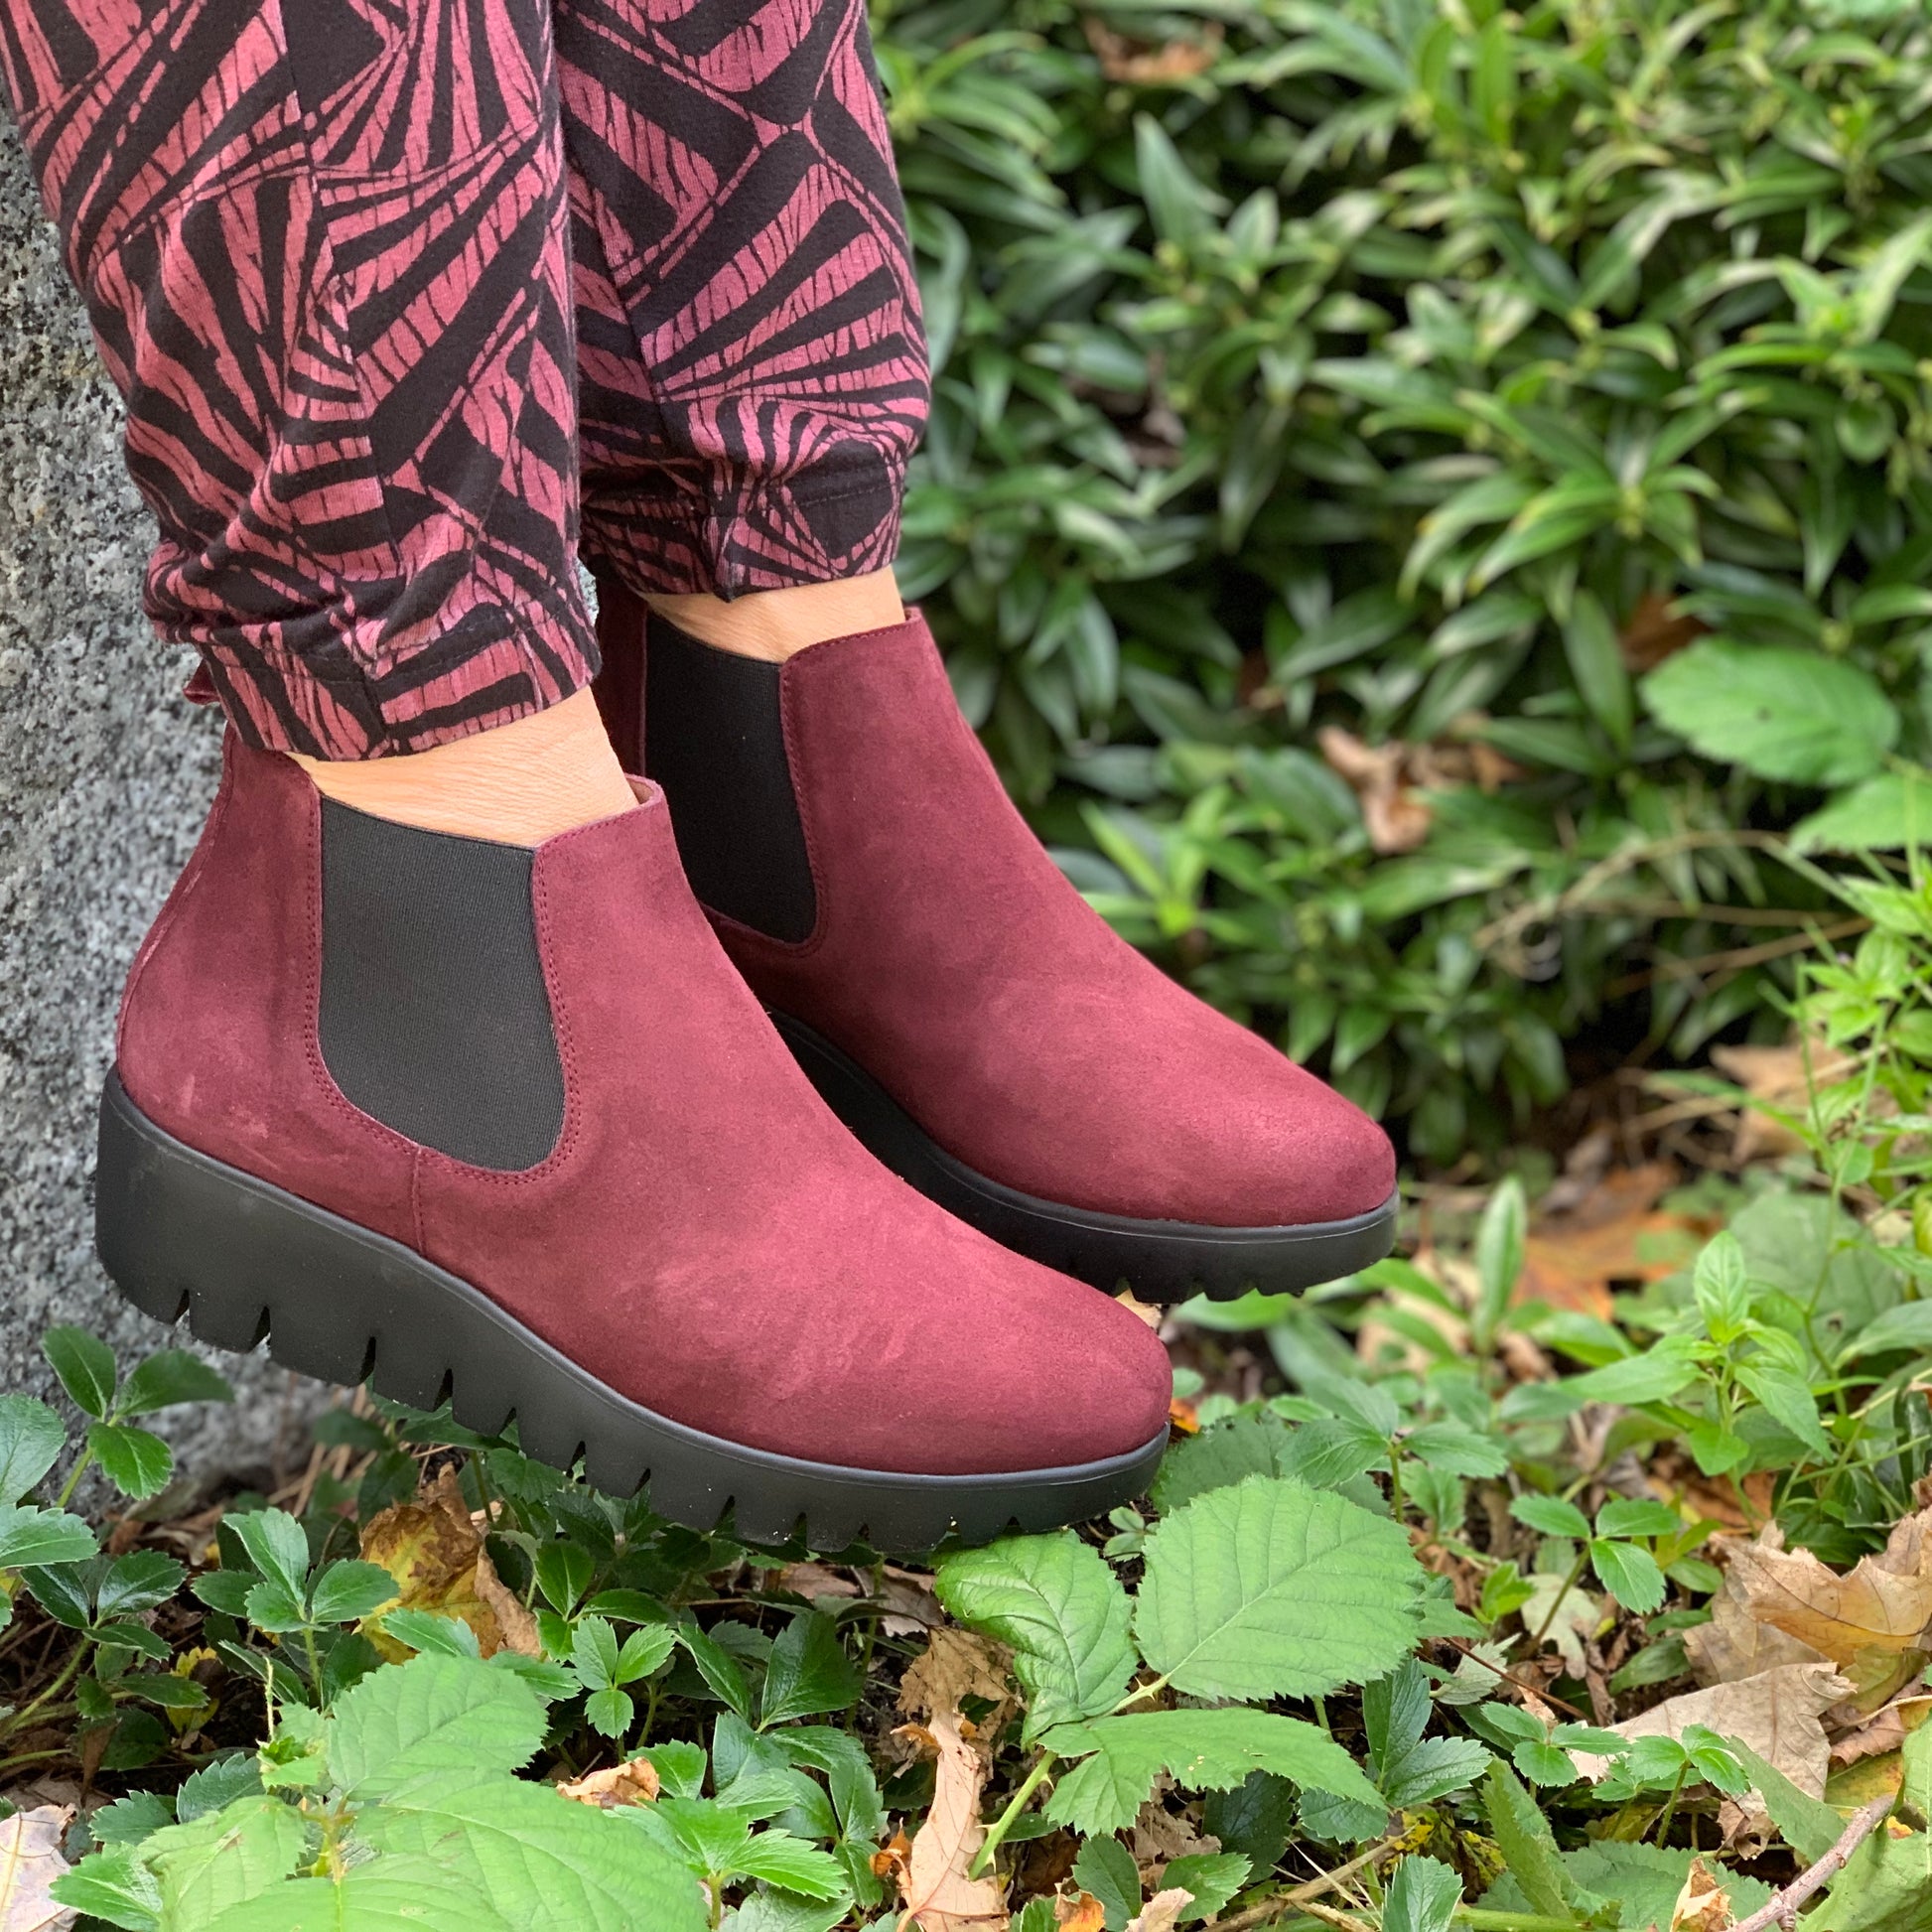 A close up of a persons feet wearing a dark wine coloured boot. The boots have an elastic side panel and black wedge heel.  